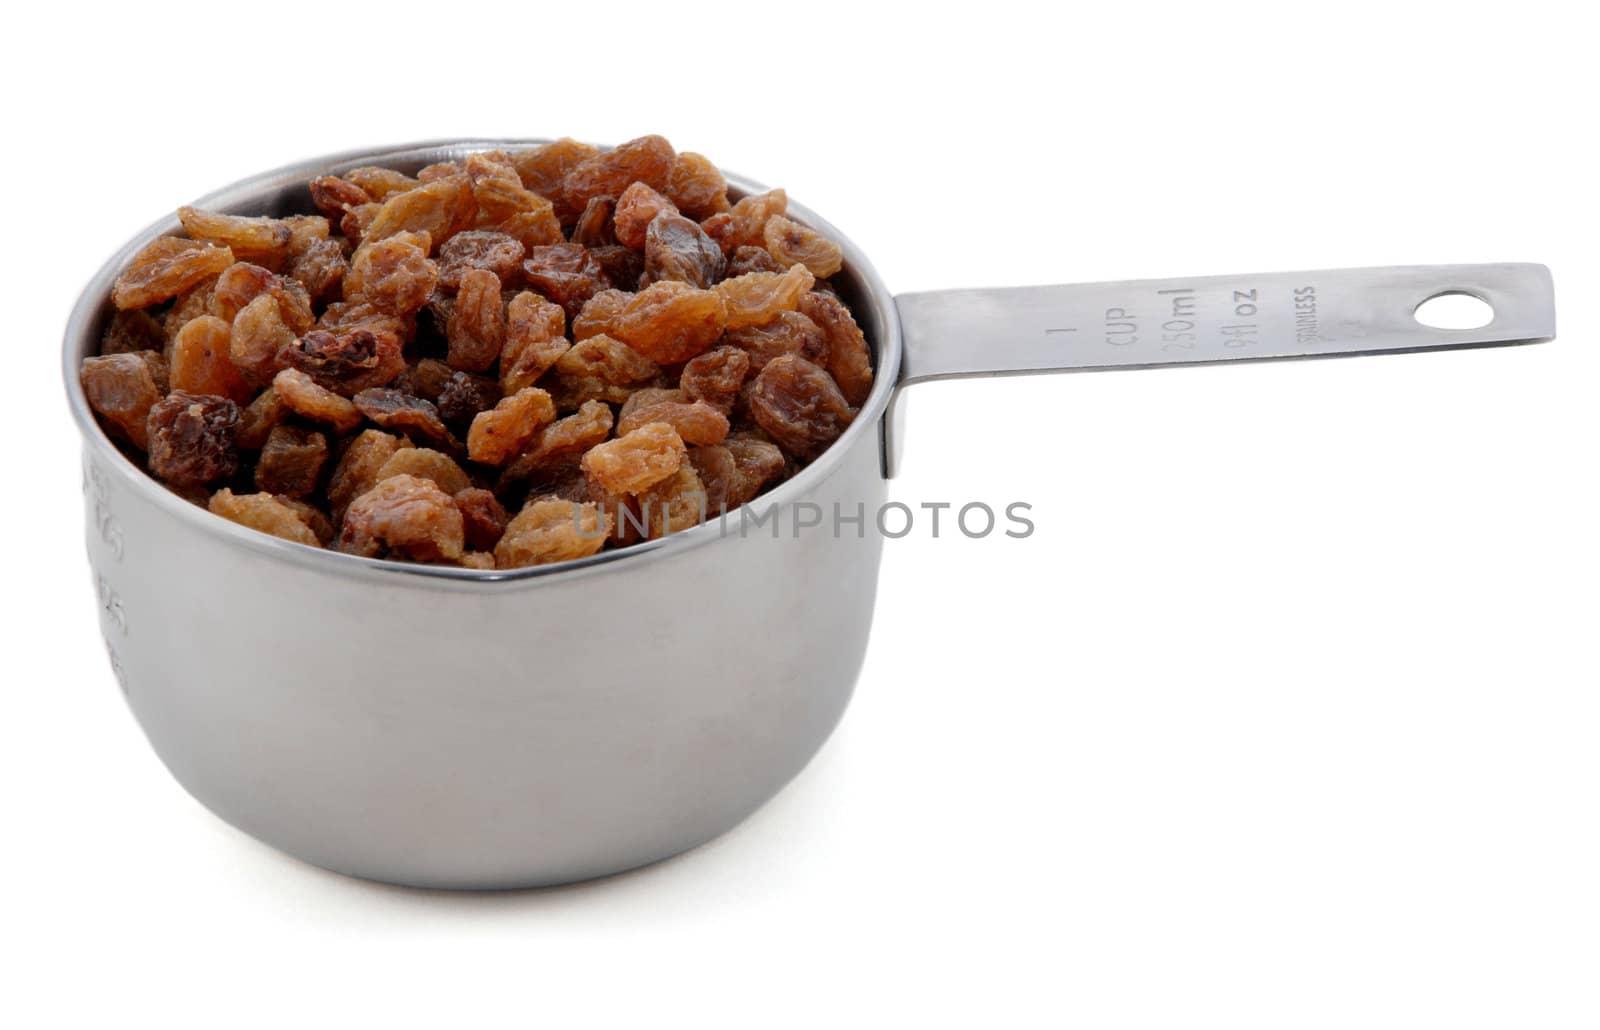 Sultanas presented in an American metal cup measure, isolated on a white background